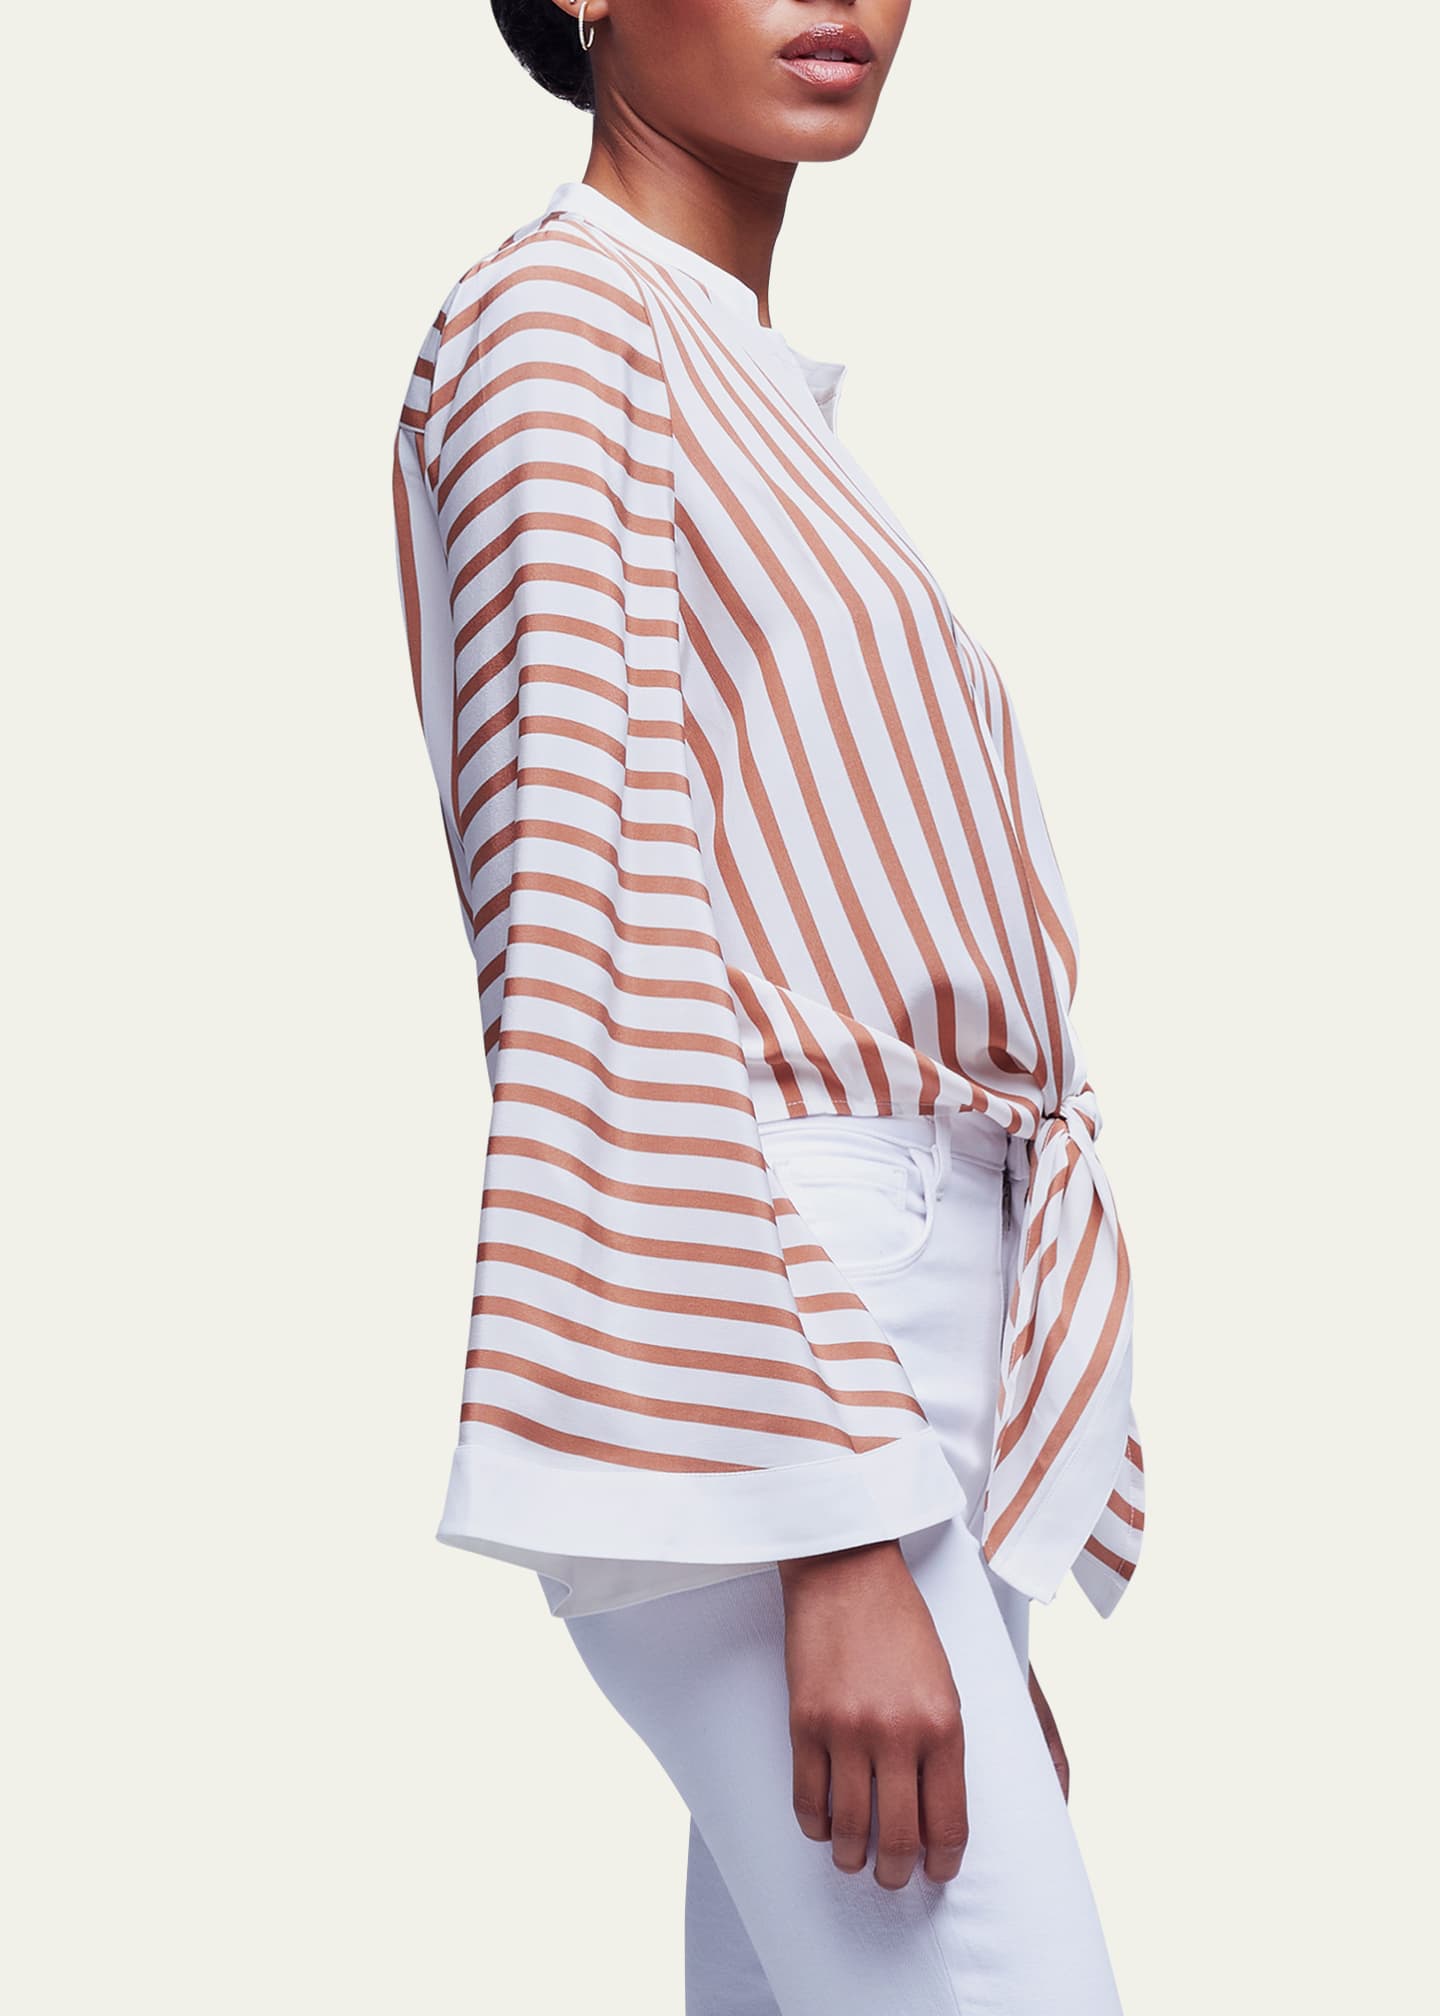 L'Agence Charlize Striped Bell-Sleeve Blouse - Bergdorf Goodman